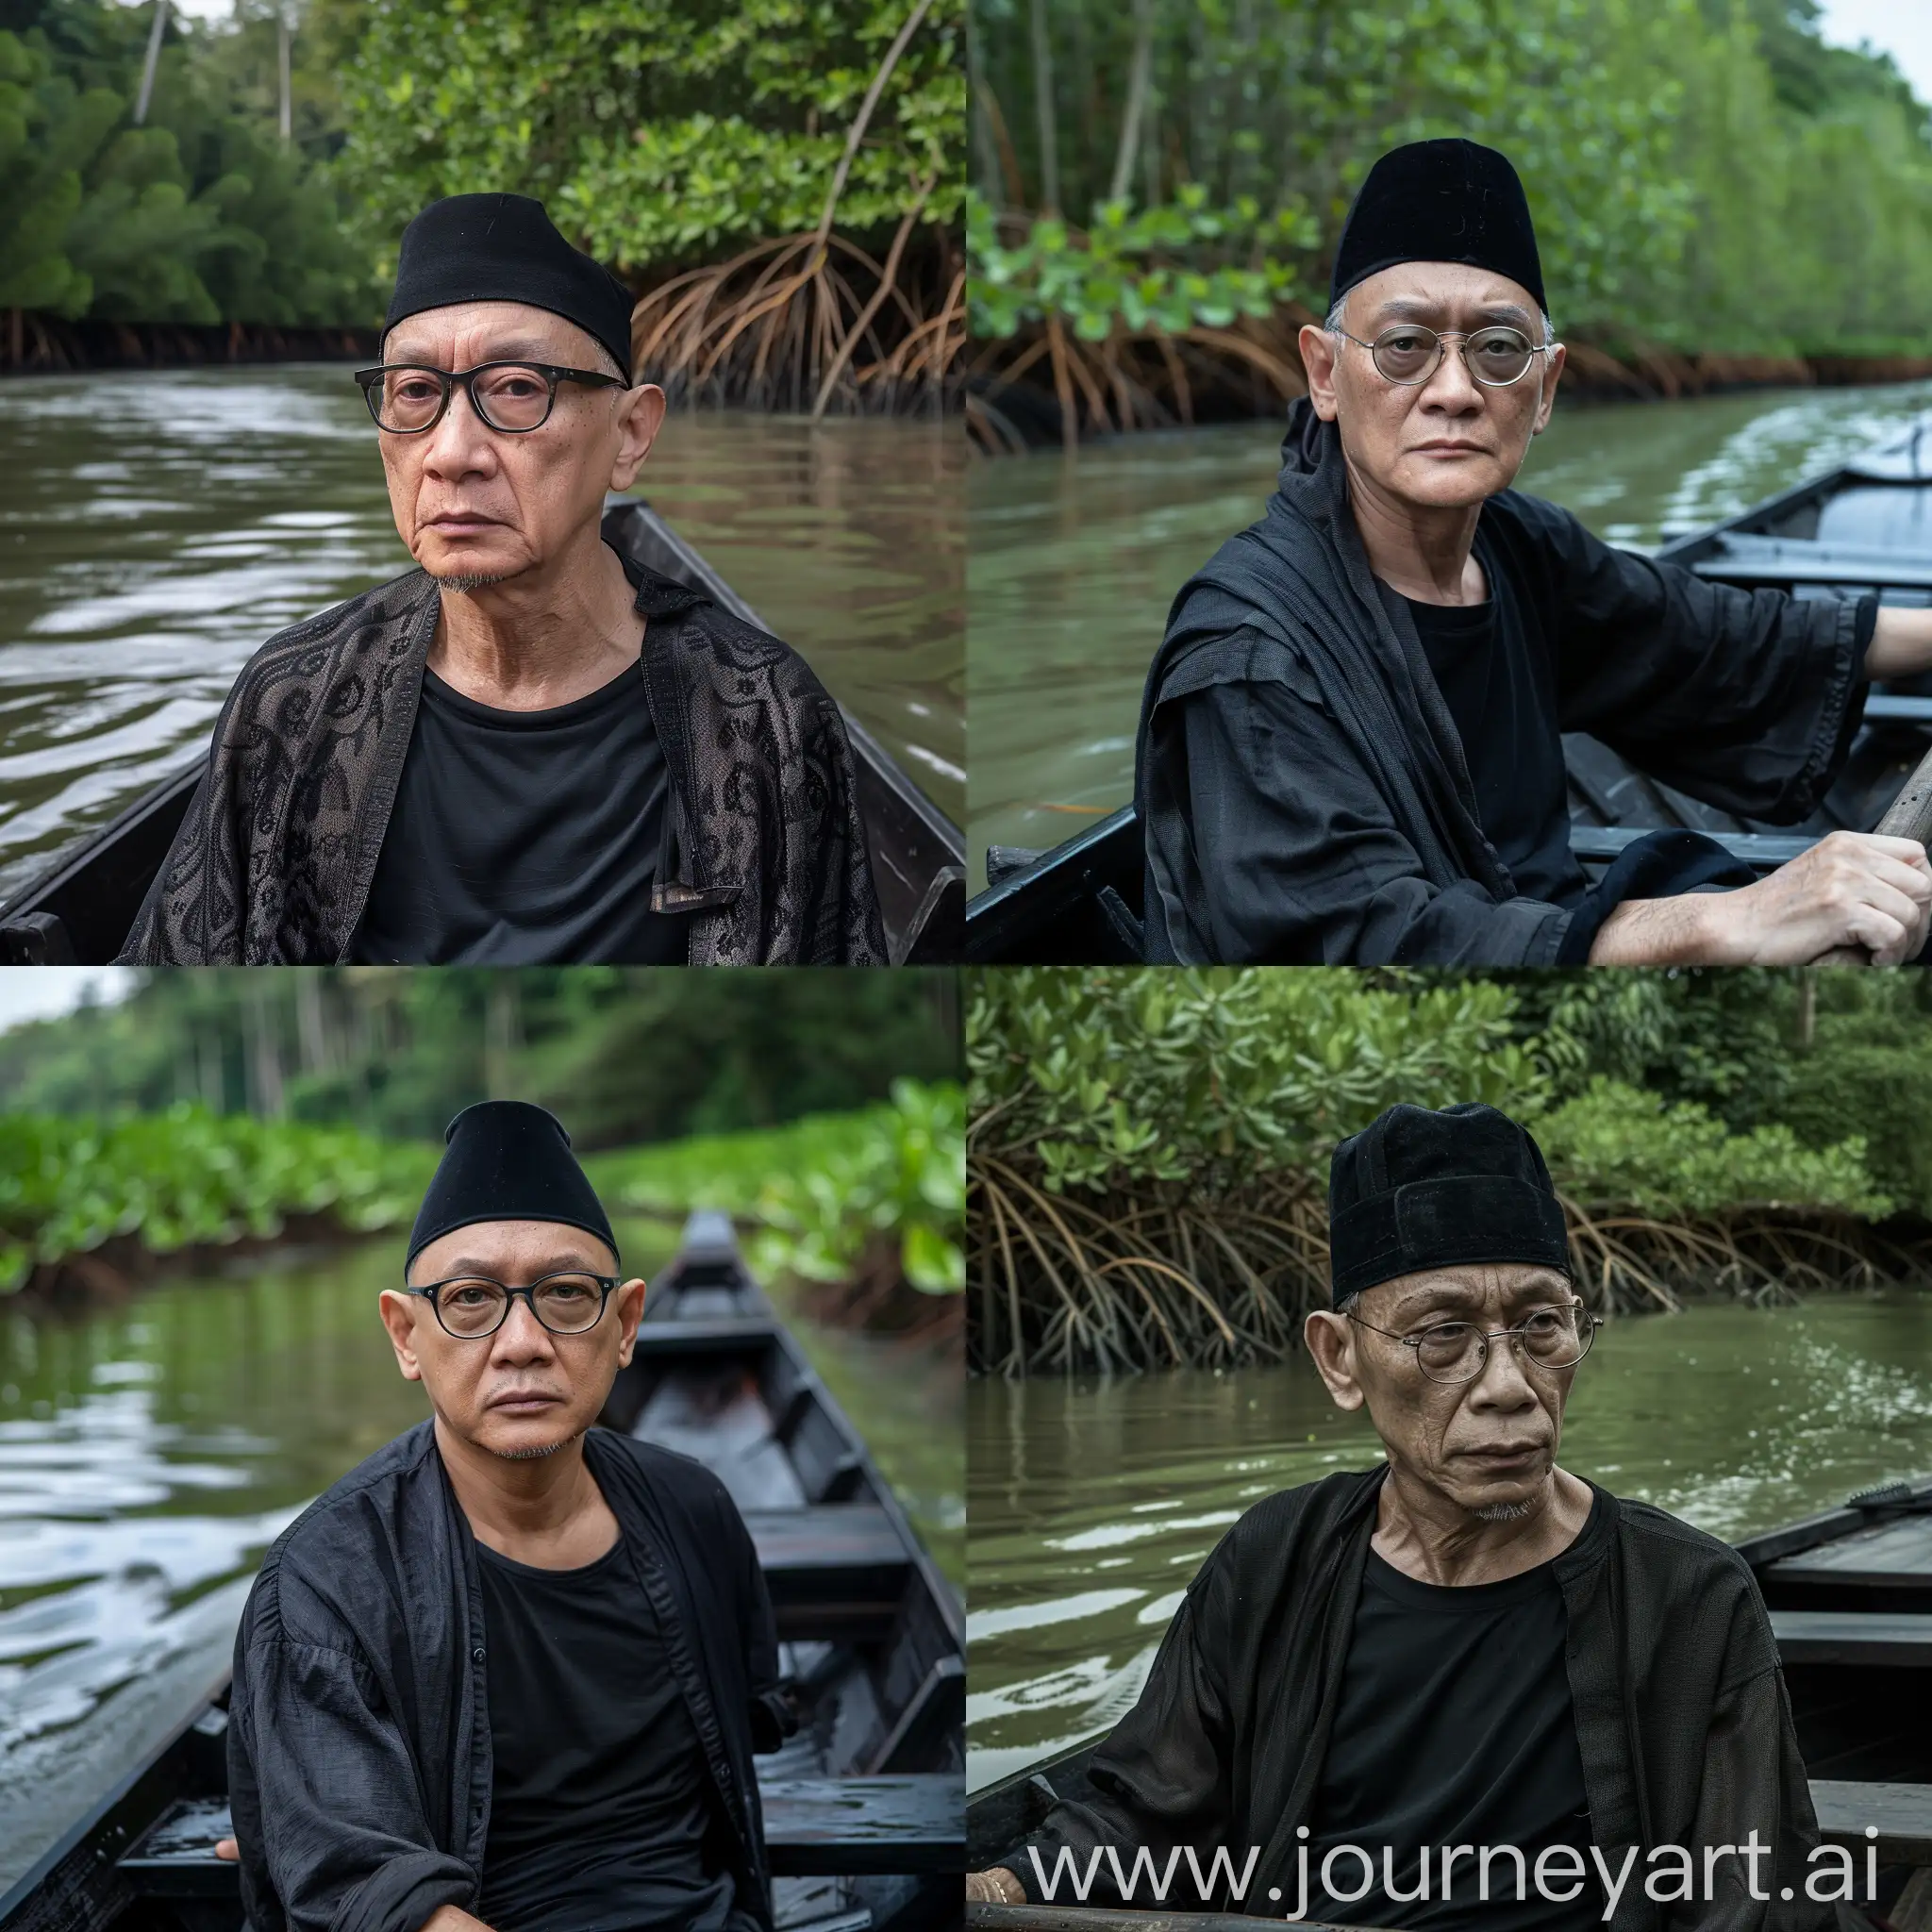 Indonesian-Fisherman-in-Traditional-Attire-Rowing-on-Serene-Mangrove-River